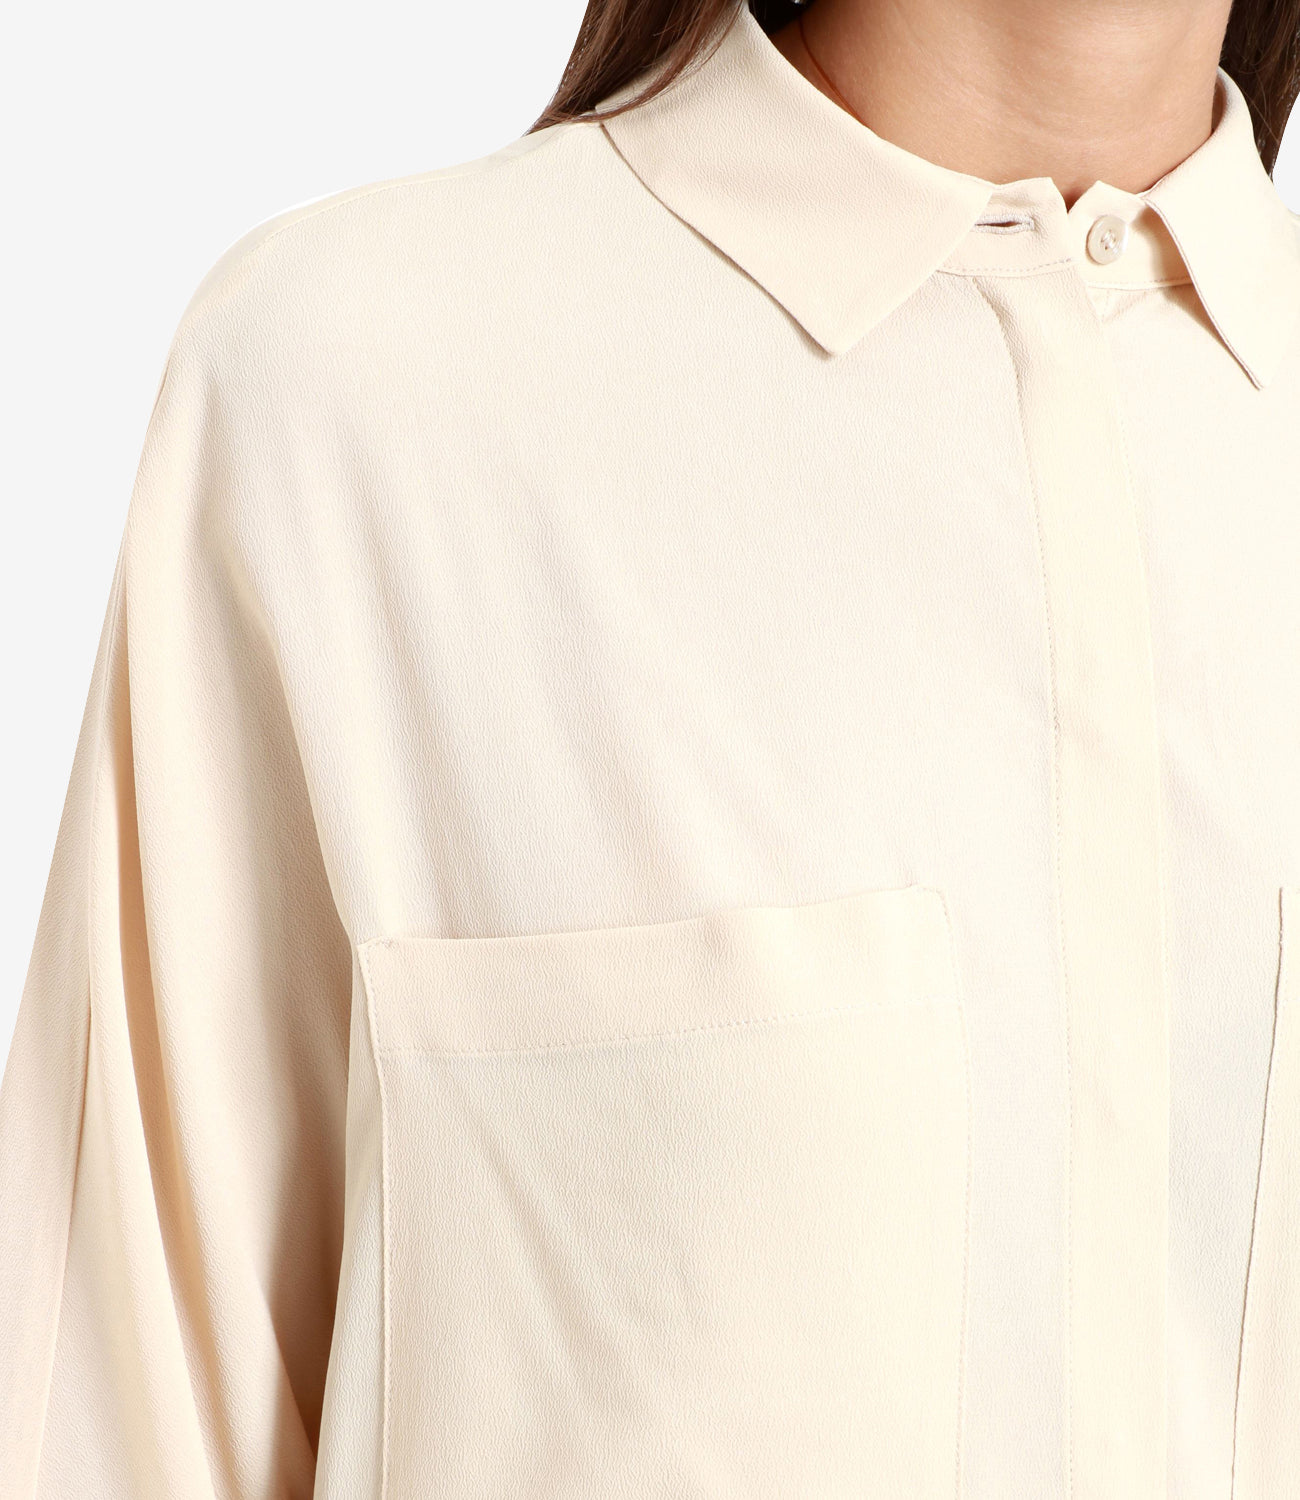 Semicouture | Tiffany Parchment Shirt